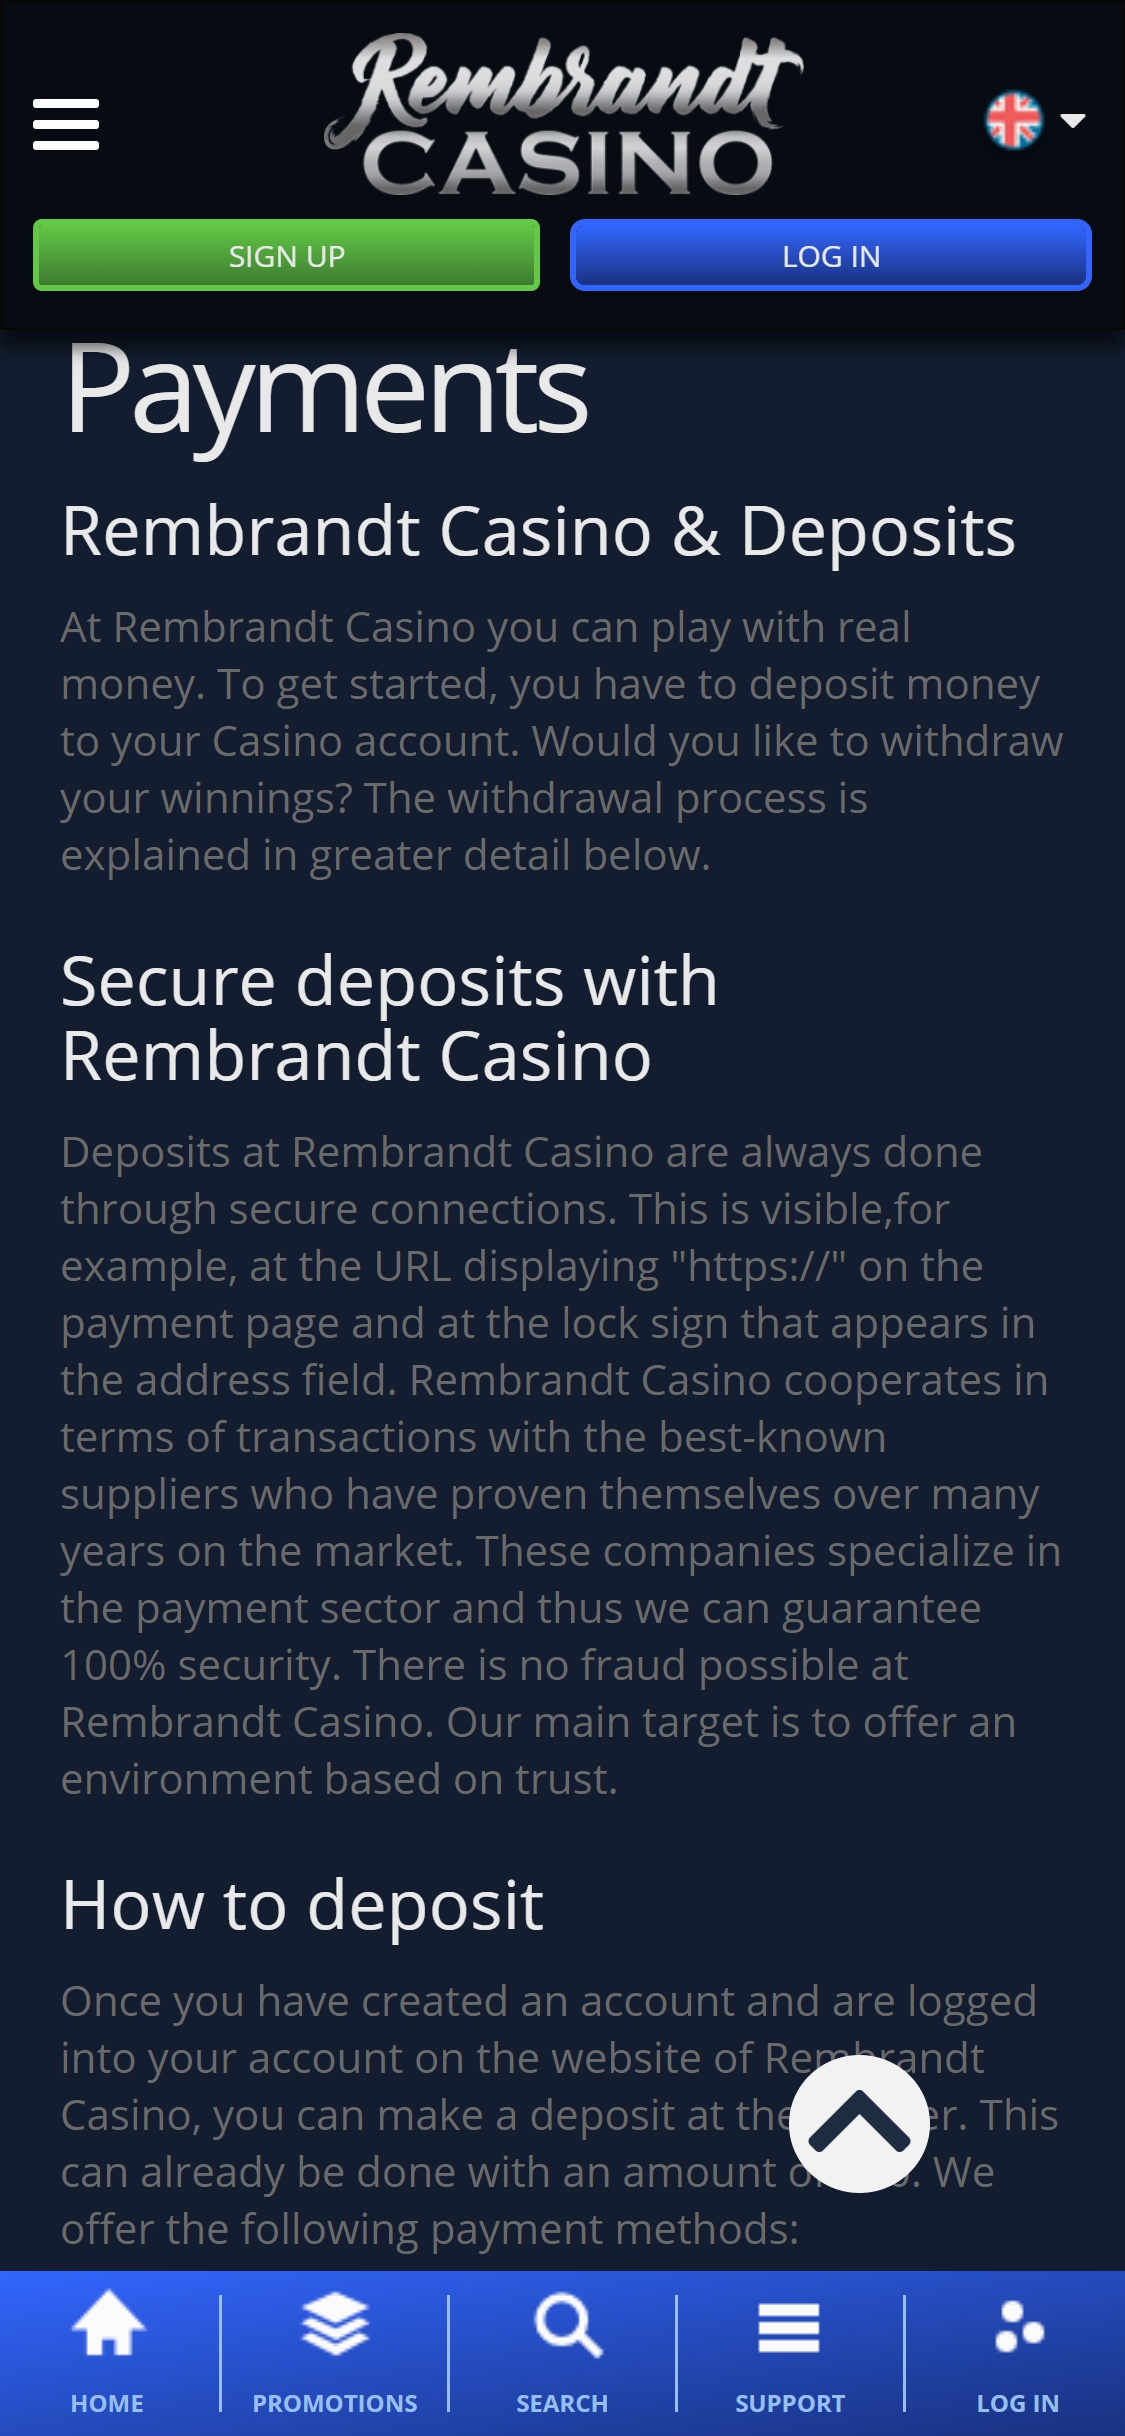 Rembrandt Casino Mobile Payment Methods Review